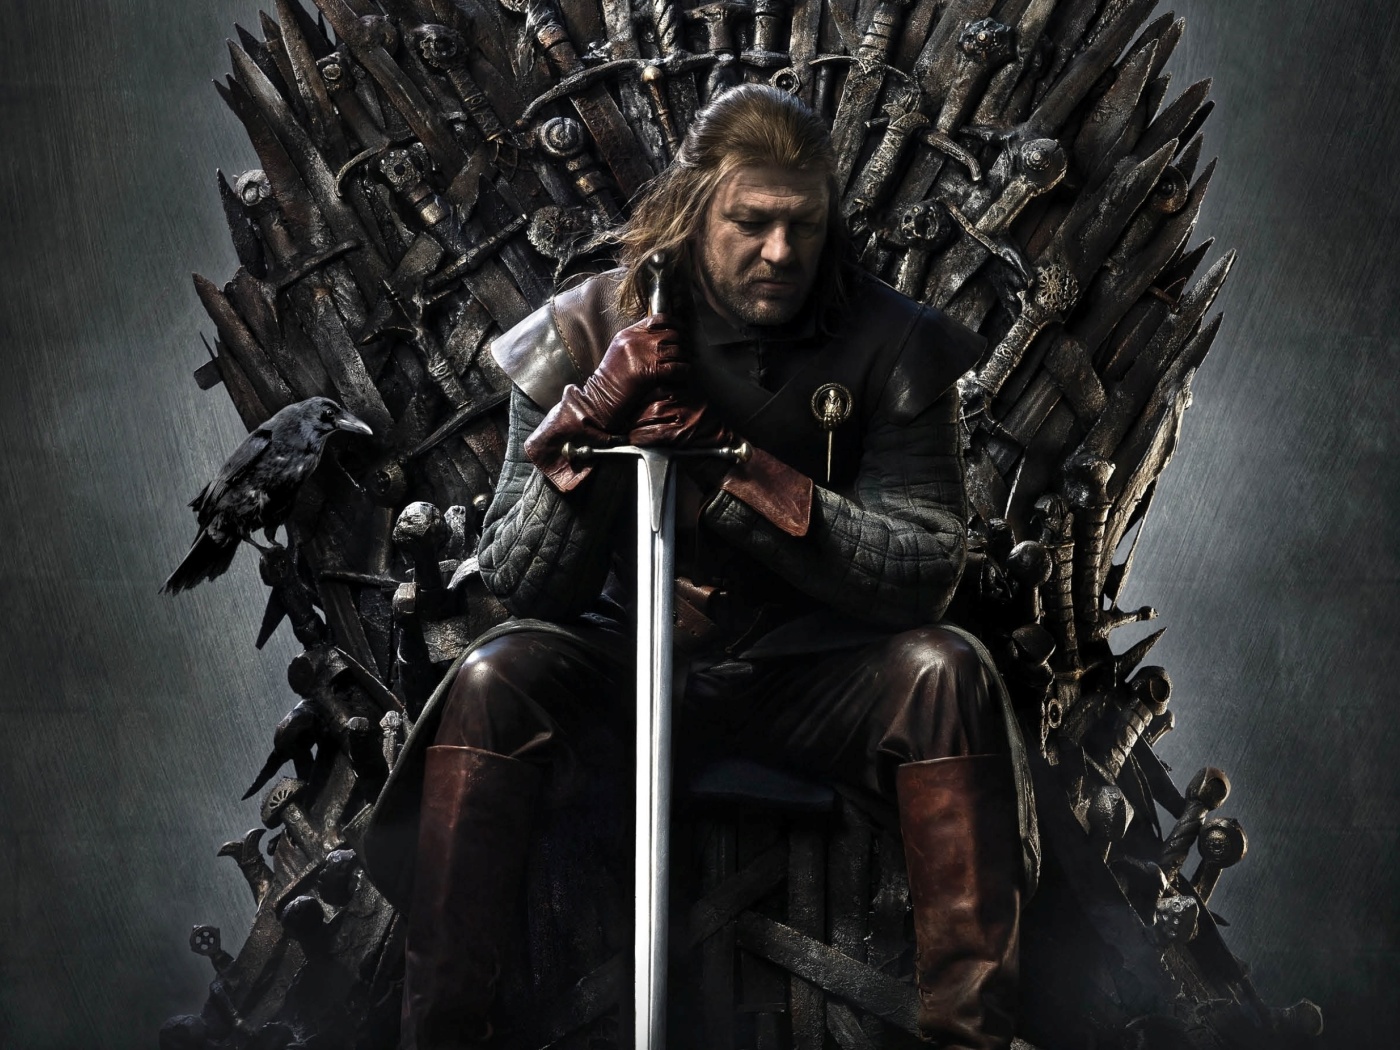 Das Game Of Thrones A Song of Ice and Fire with Ned Star Wallpaper 1400x1050